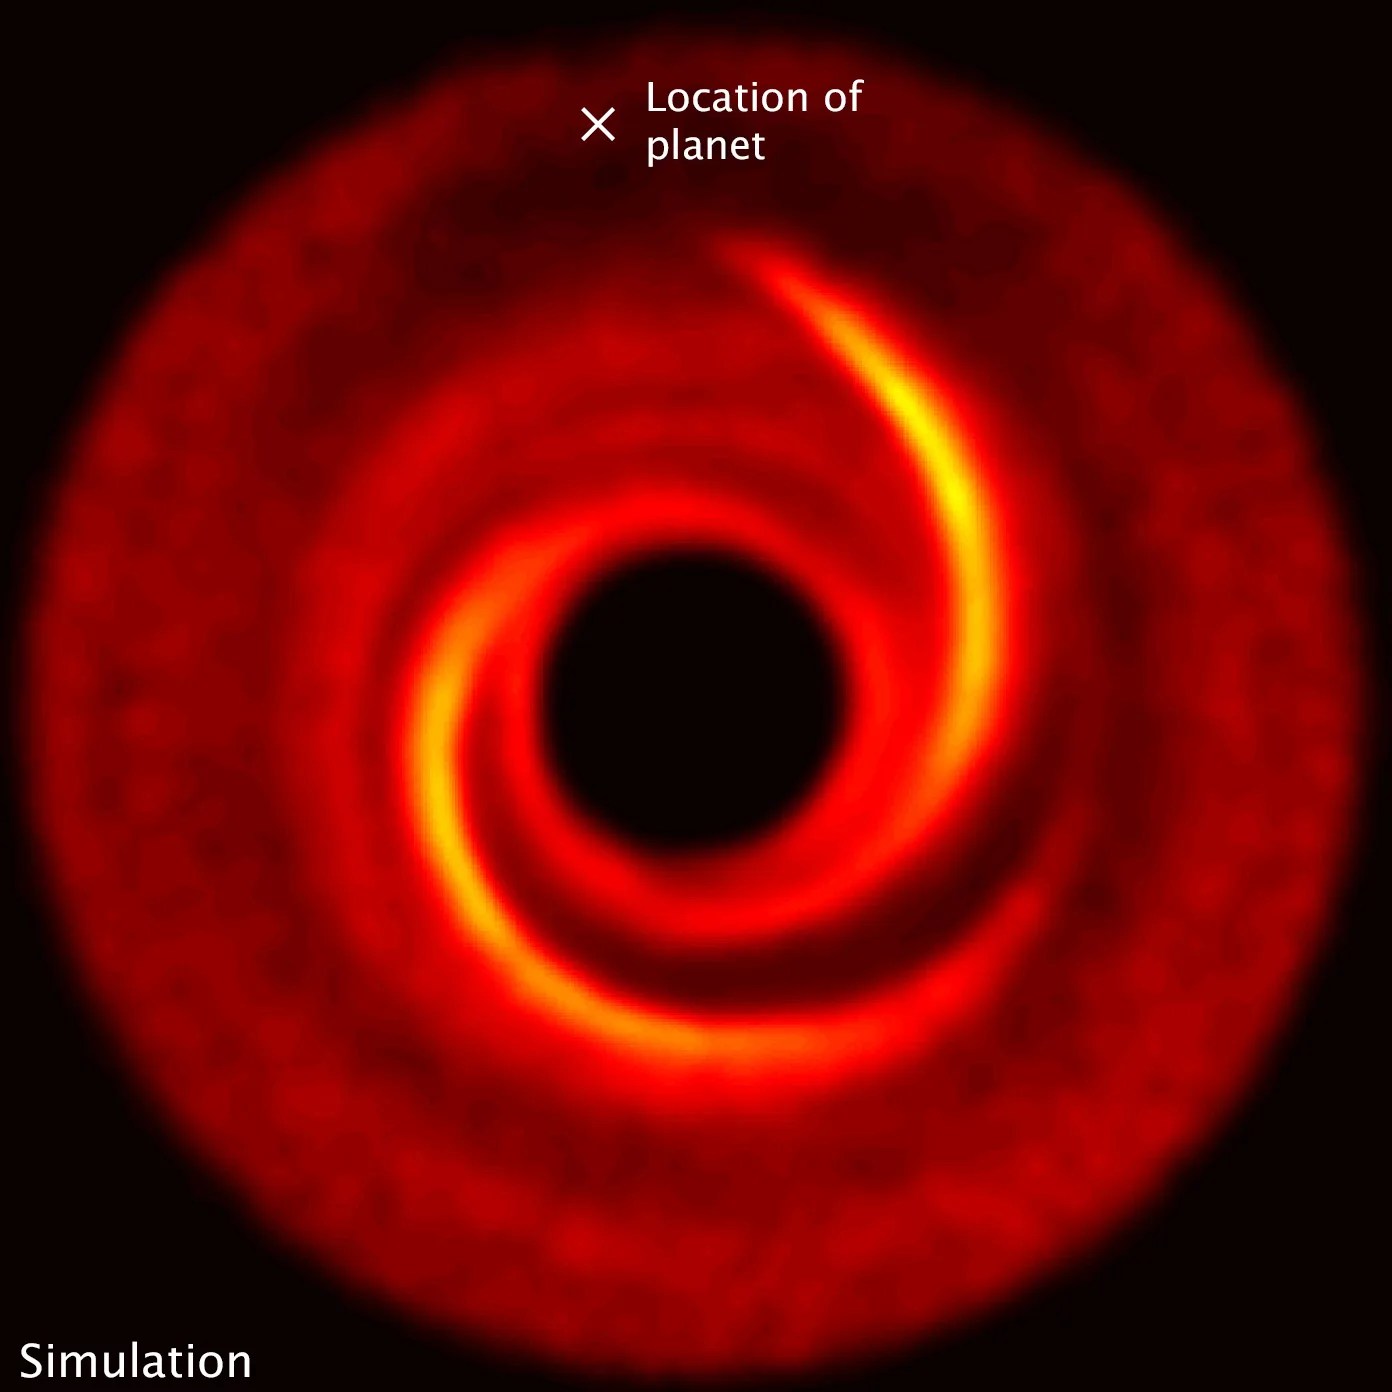 Protoplanetary disk around the young star MWC 758